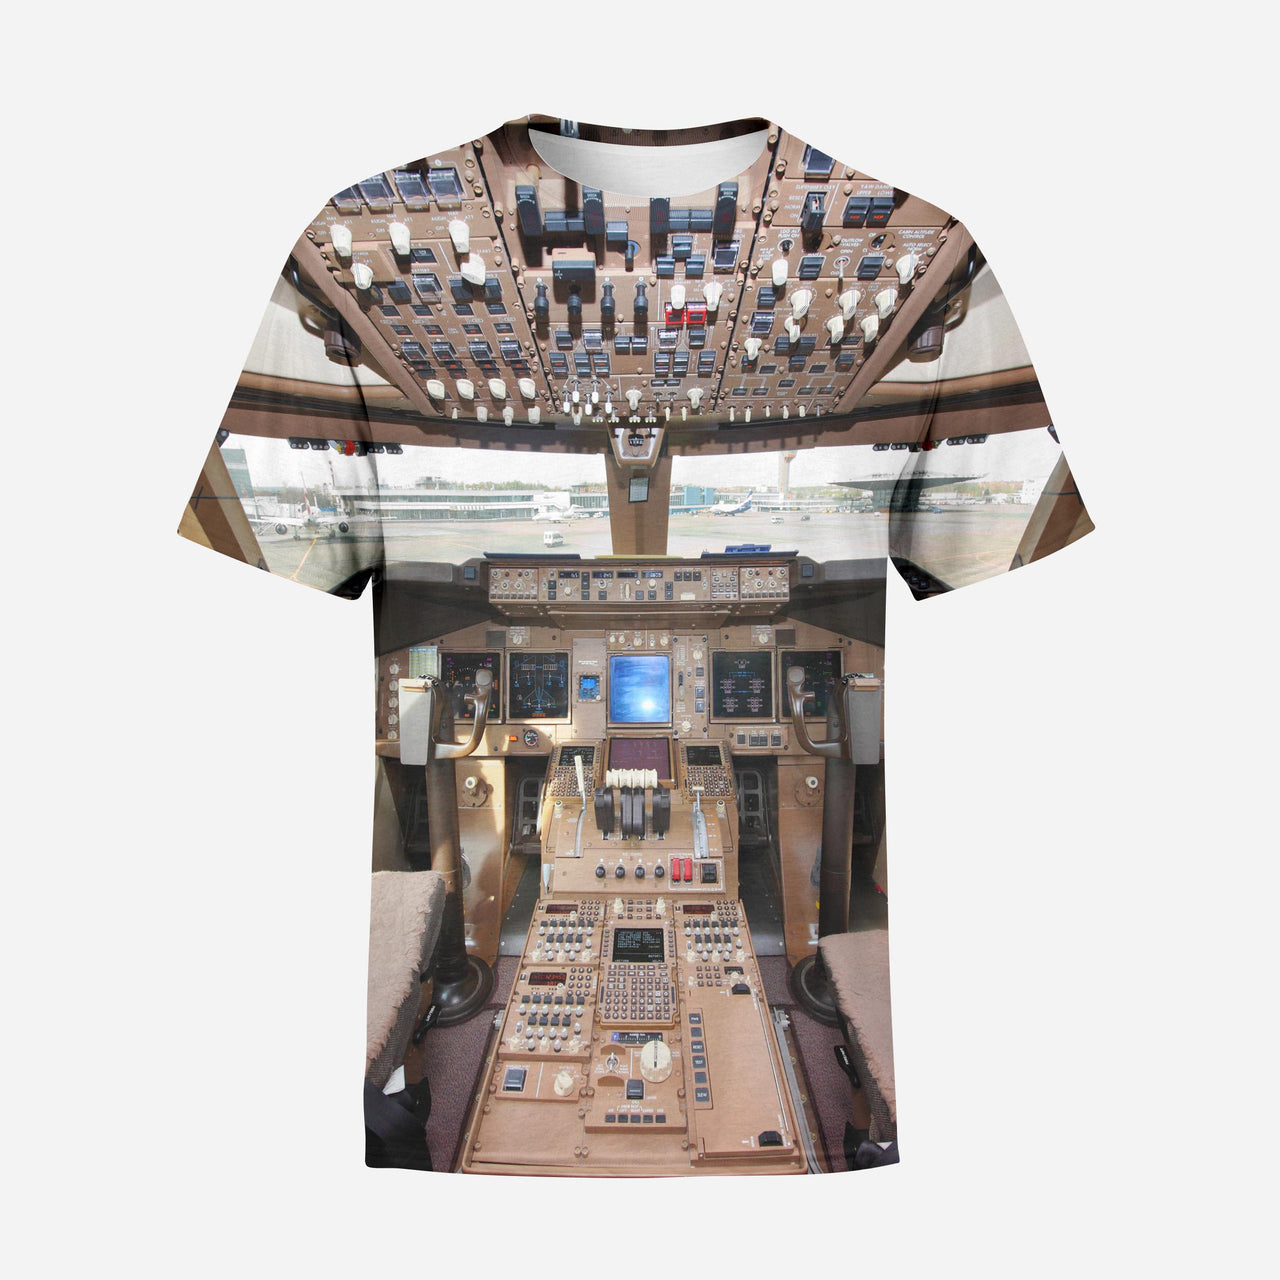 Boeing 747 Cockpit Printed 3D T-Shirts